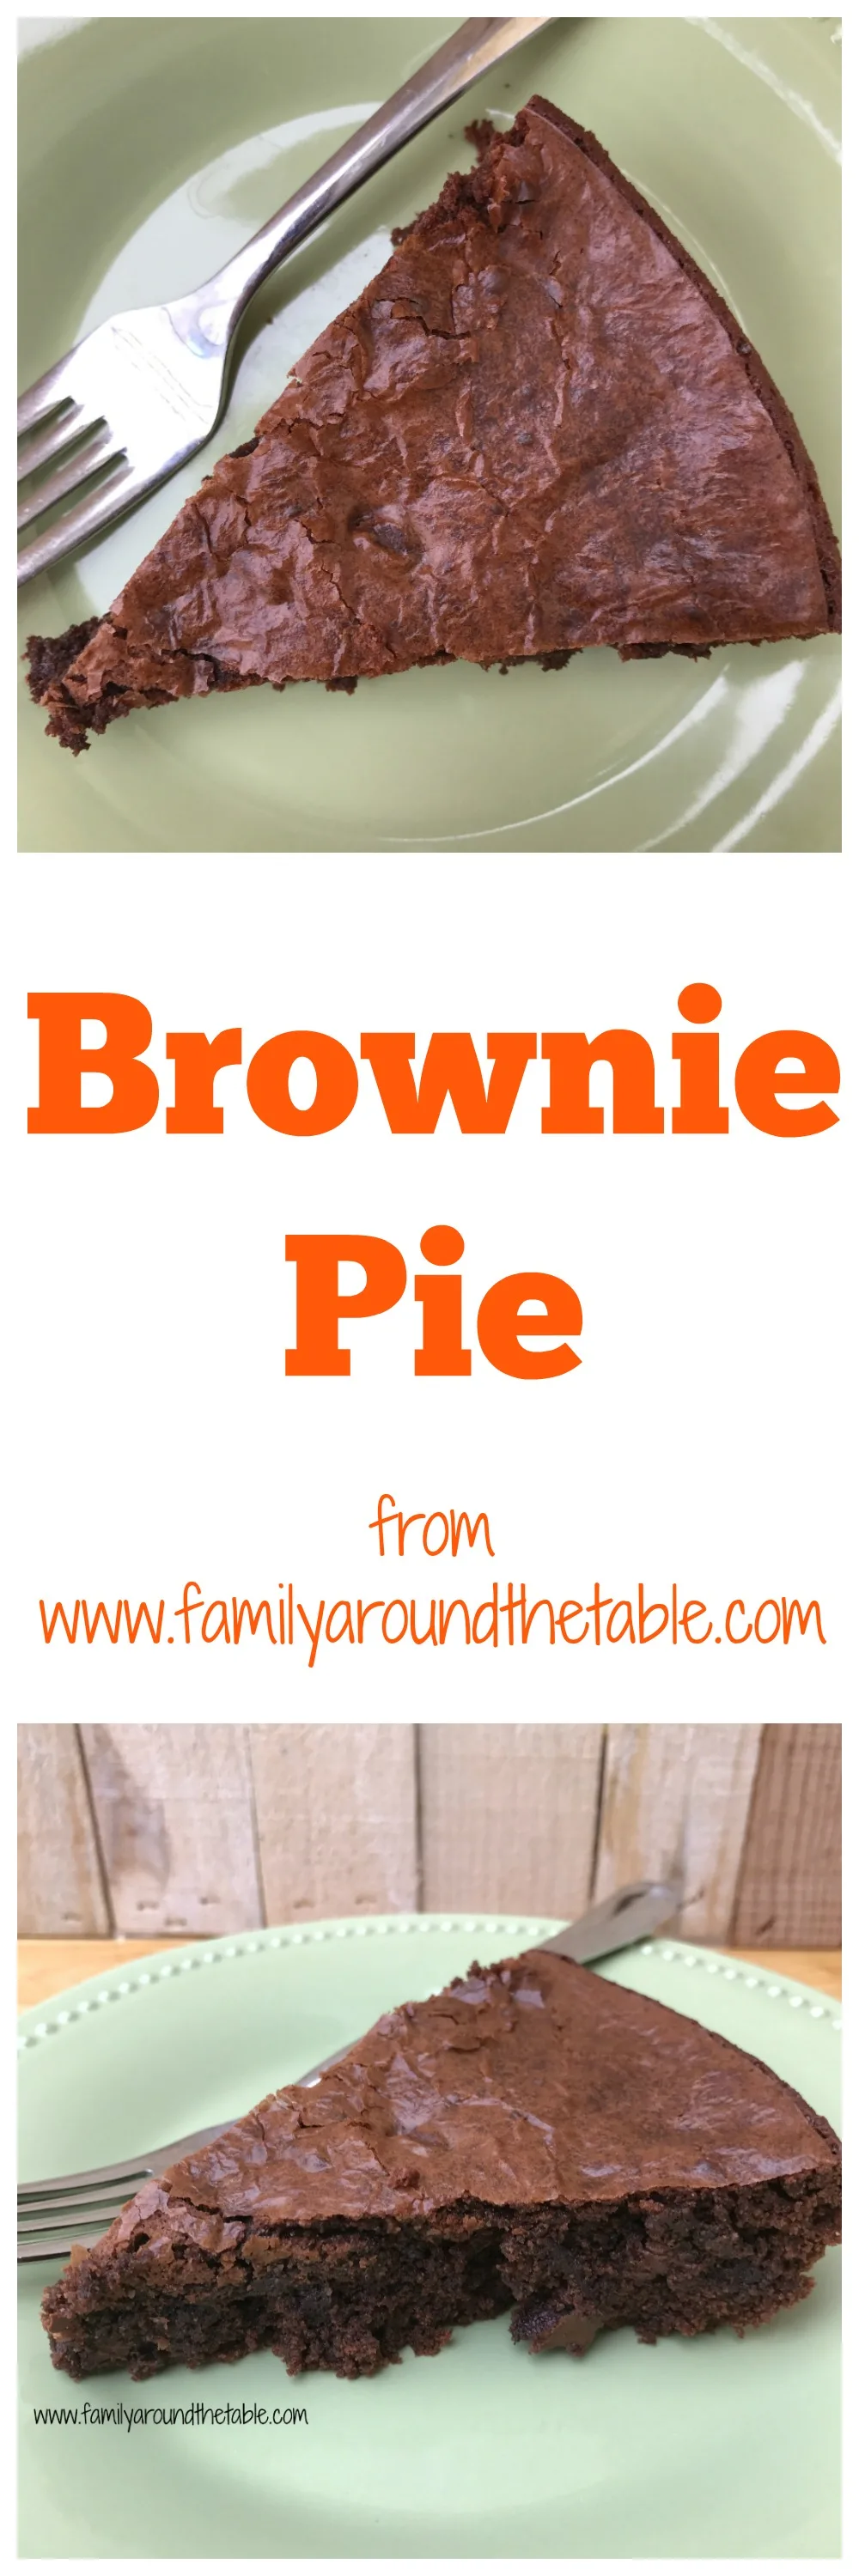 Pinterest image for brownie pie